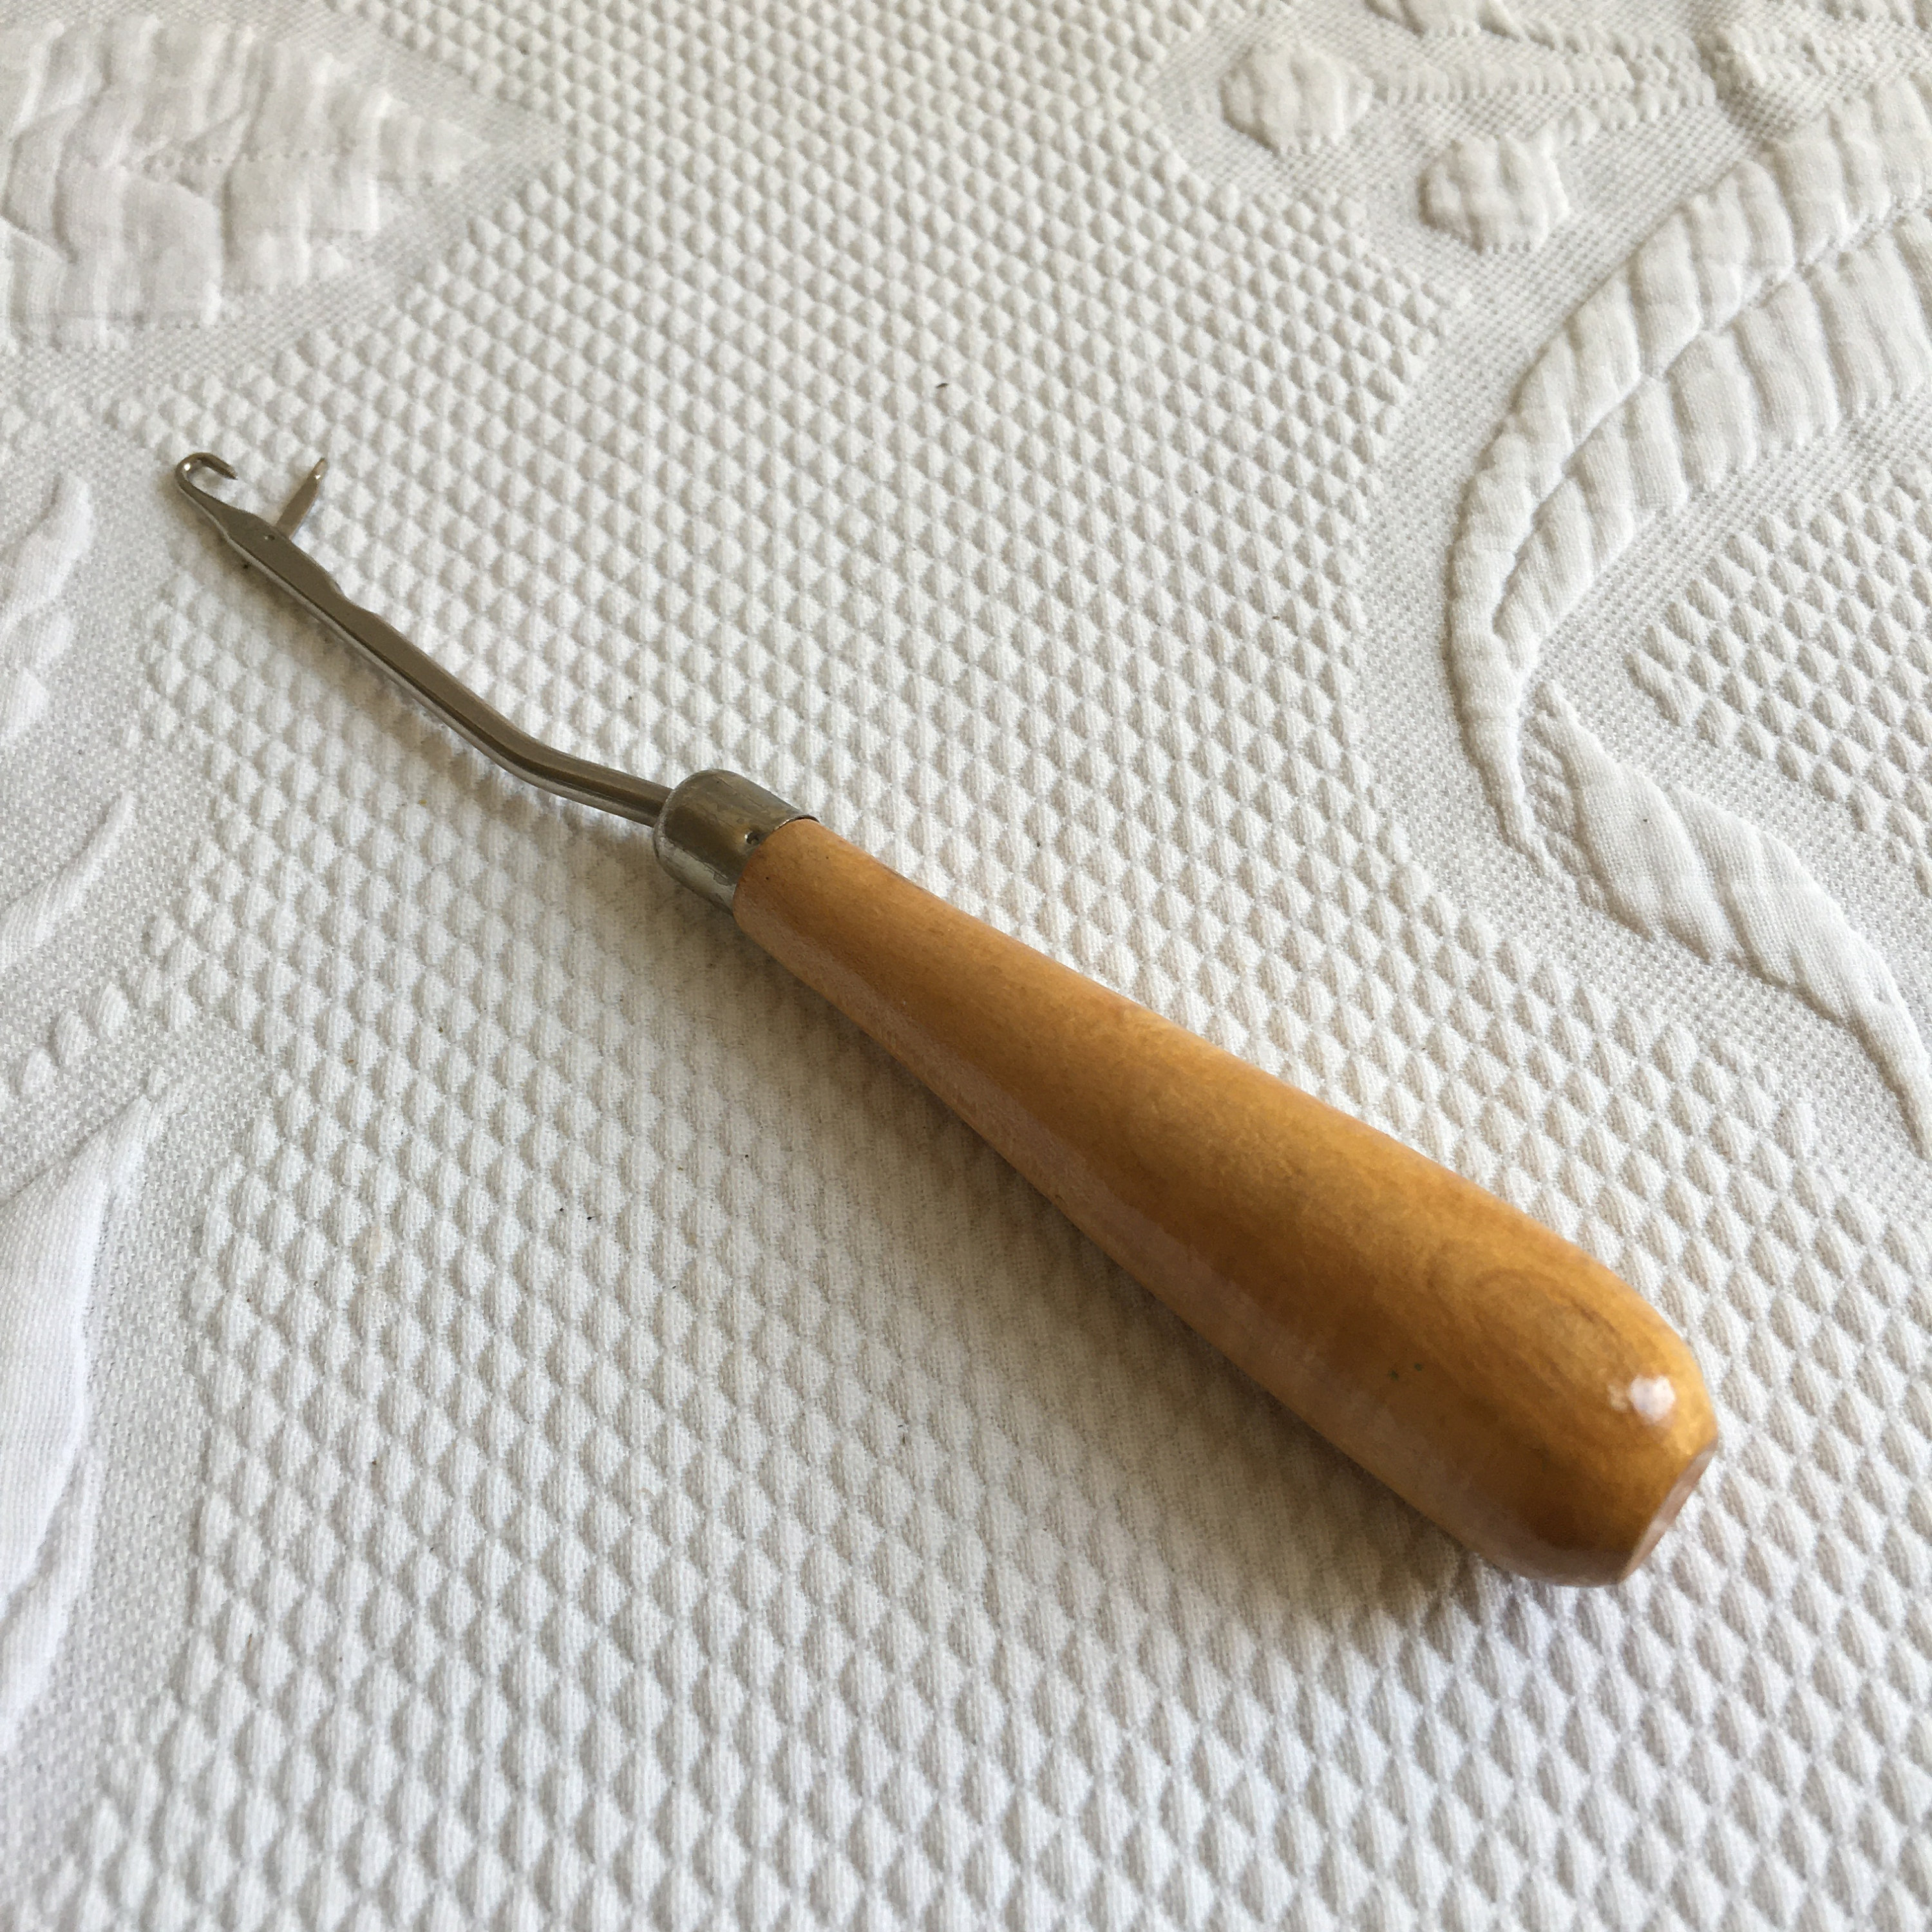 Vintage Hooked Rug Hook for Securing Yarns in a Hooked Rug. Wooden Handle  and Metal Hook With Swing Protector for Pulling Through. 